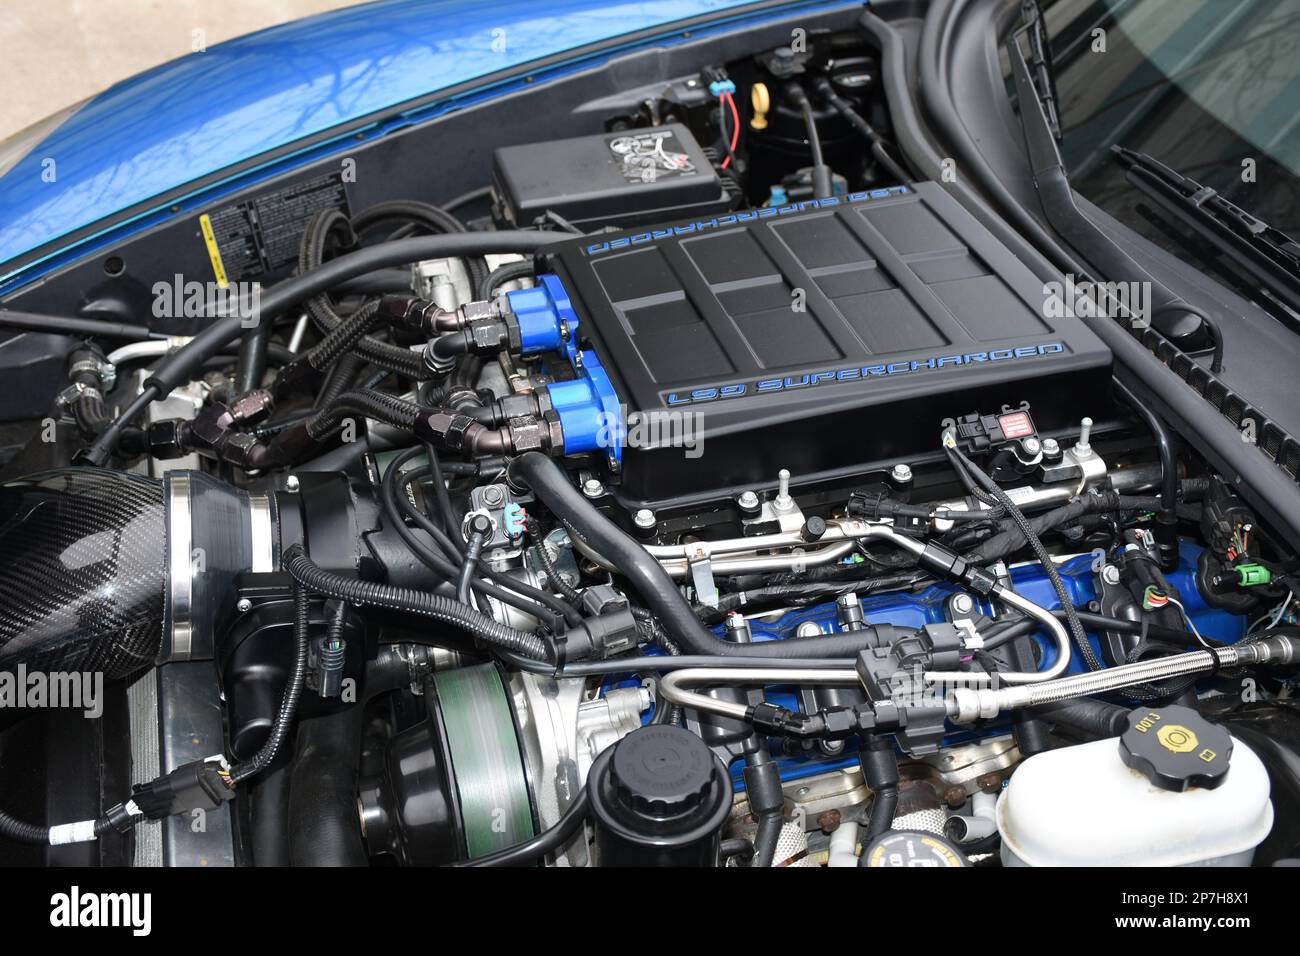 The LS9 Engine in a ZR1 Supercharged Corvette on display at a car show. Stock Photo